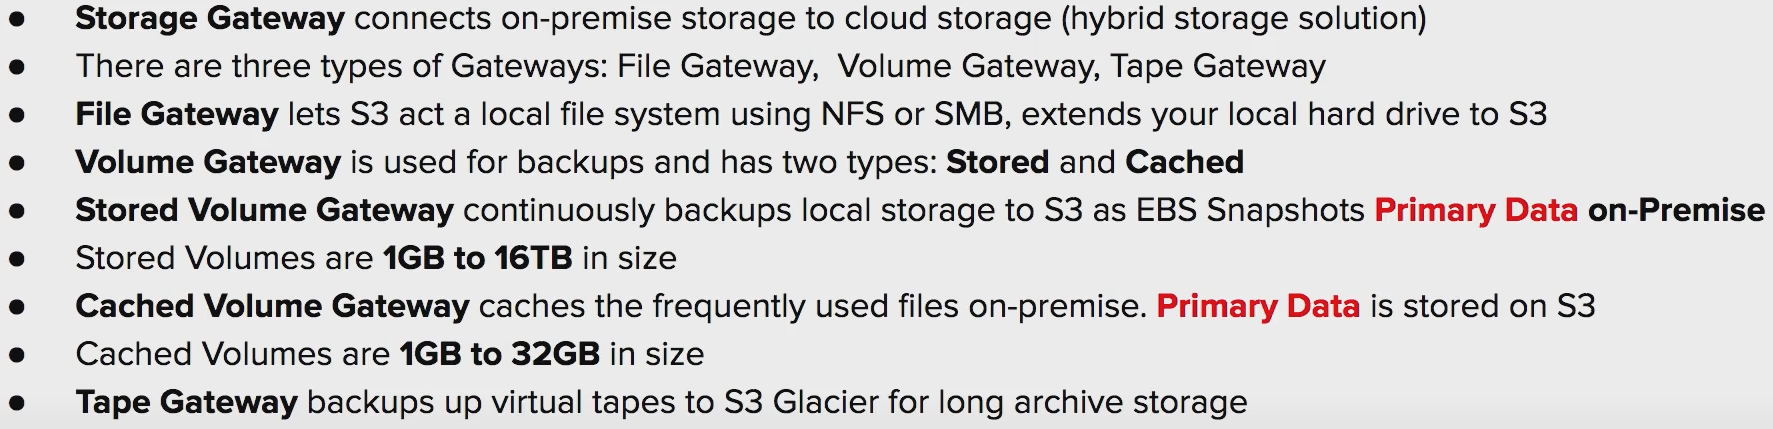 /img/AWS/Storage/Untitled%2027.png